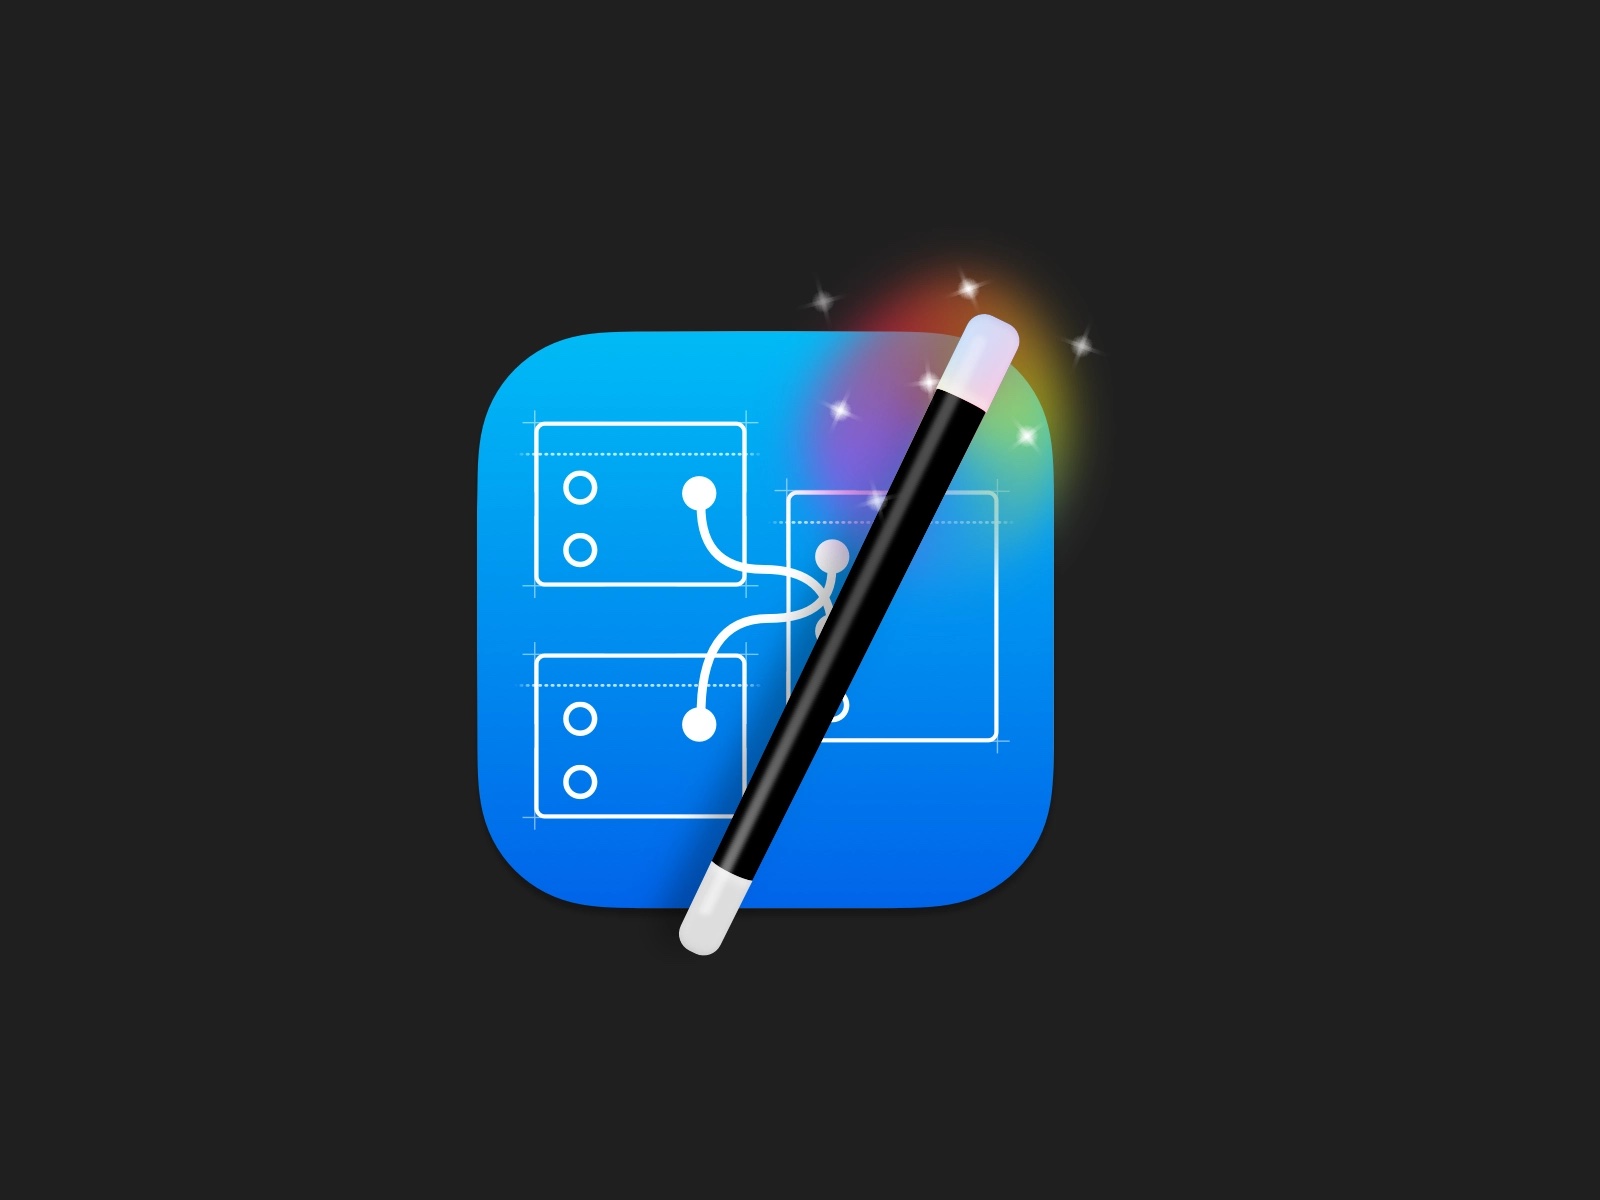 The Quartz Composer icon redesigned as a Big Sur icon. A rounded rectangle blueprint with nodes and connector lines drawn on. A magic wand with a rainbow aura and sparkles are in front of it.